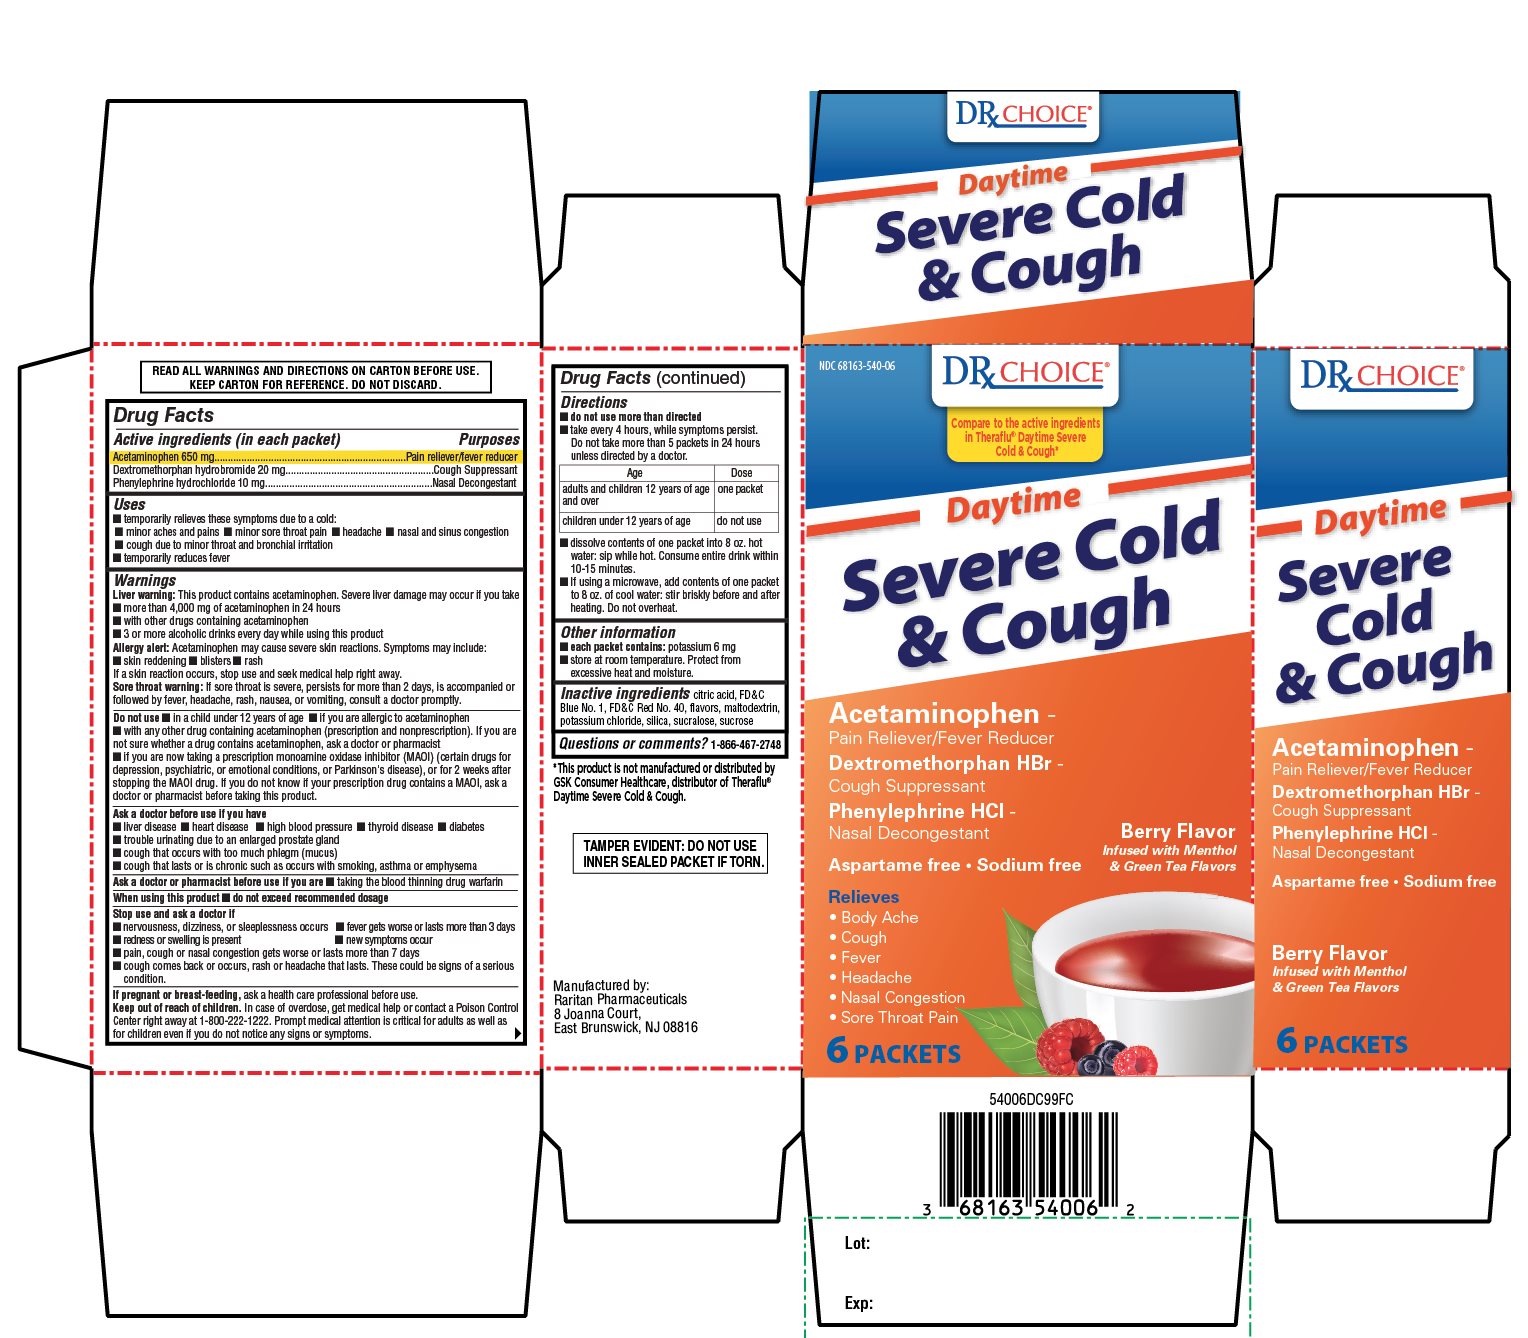 DRx Daytime Severe Cold & Cough 